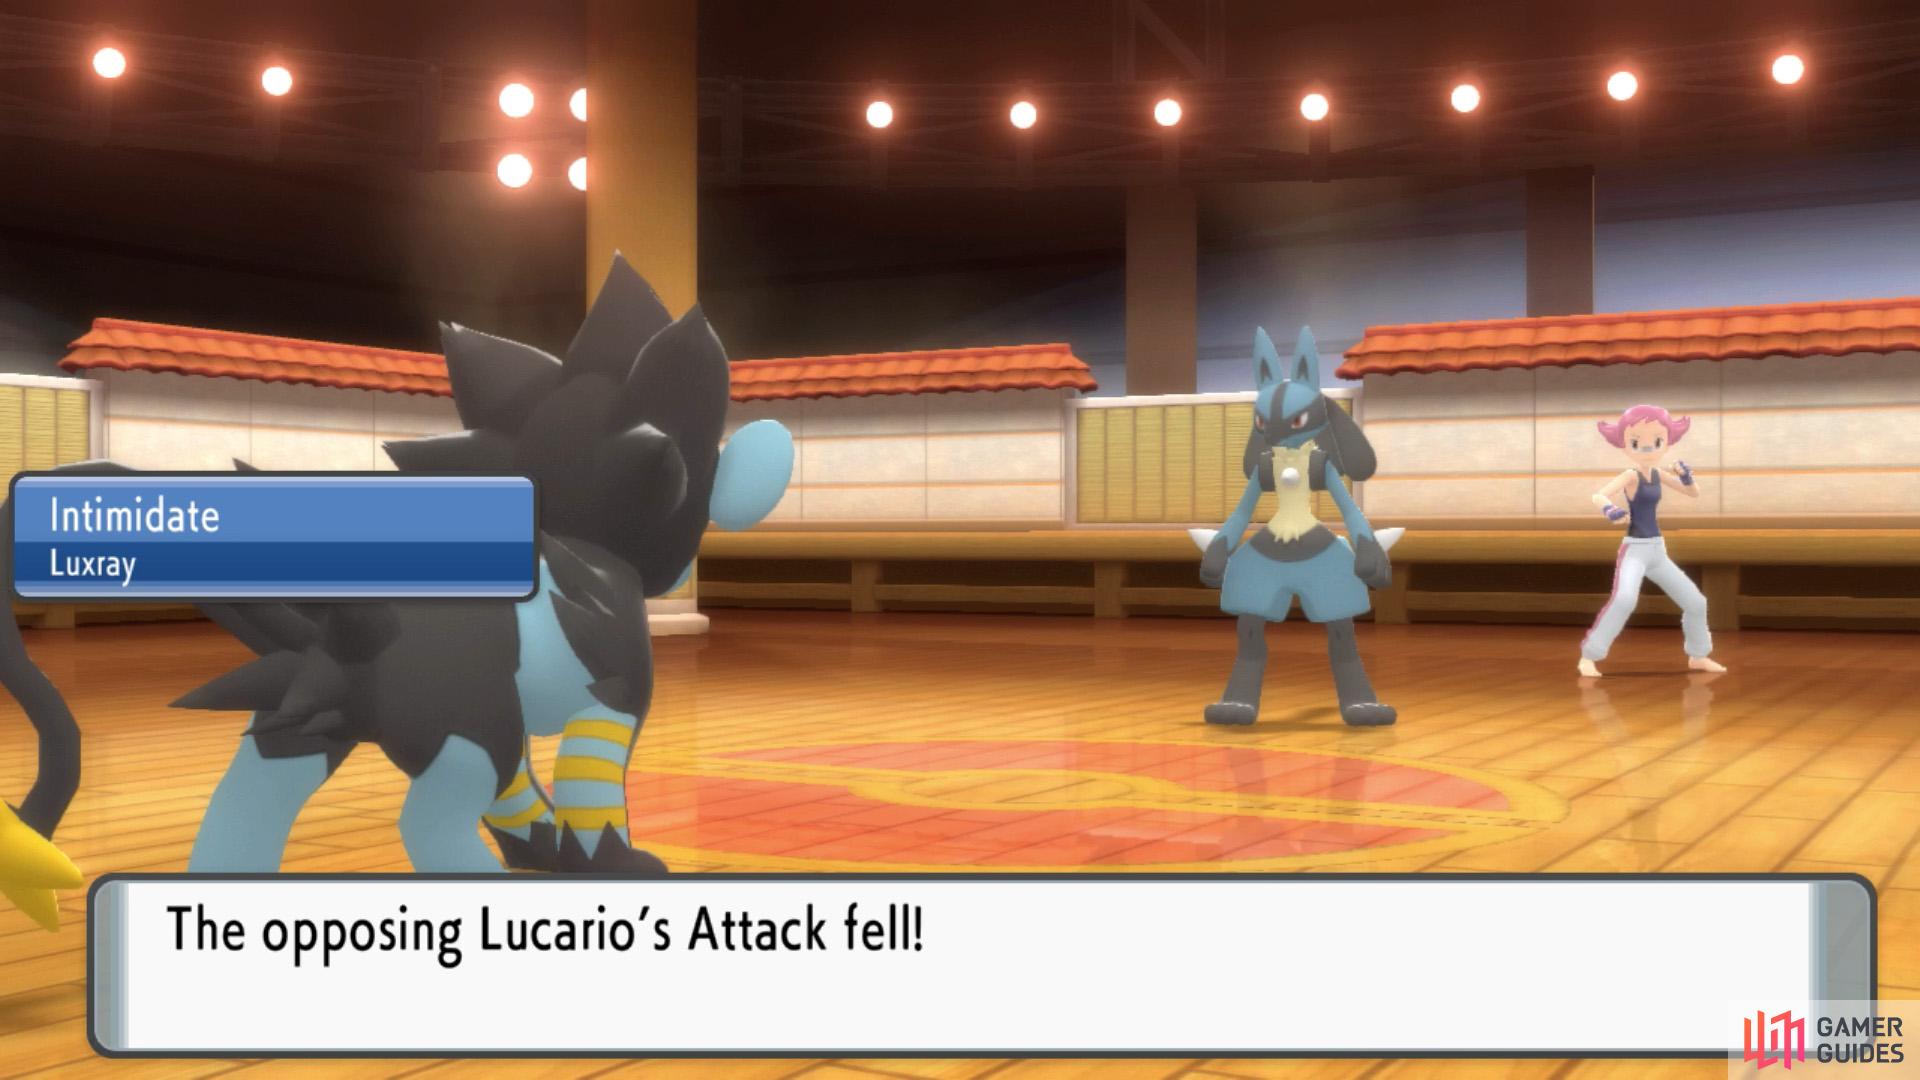 Use any tricks at your disposal to weaken Lucario.